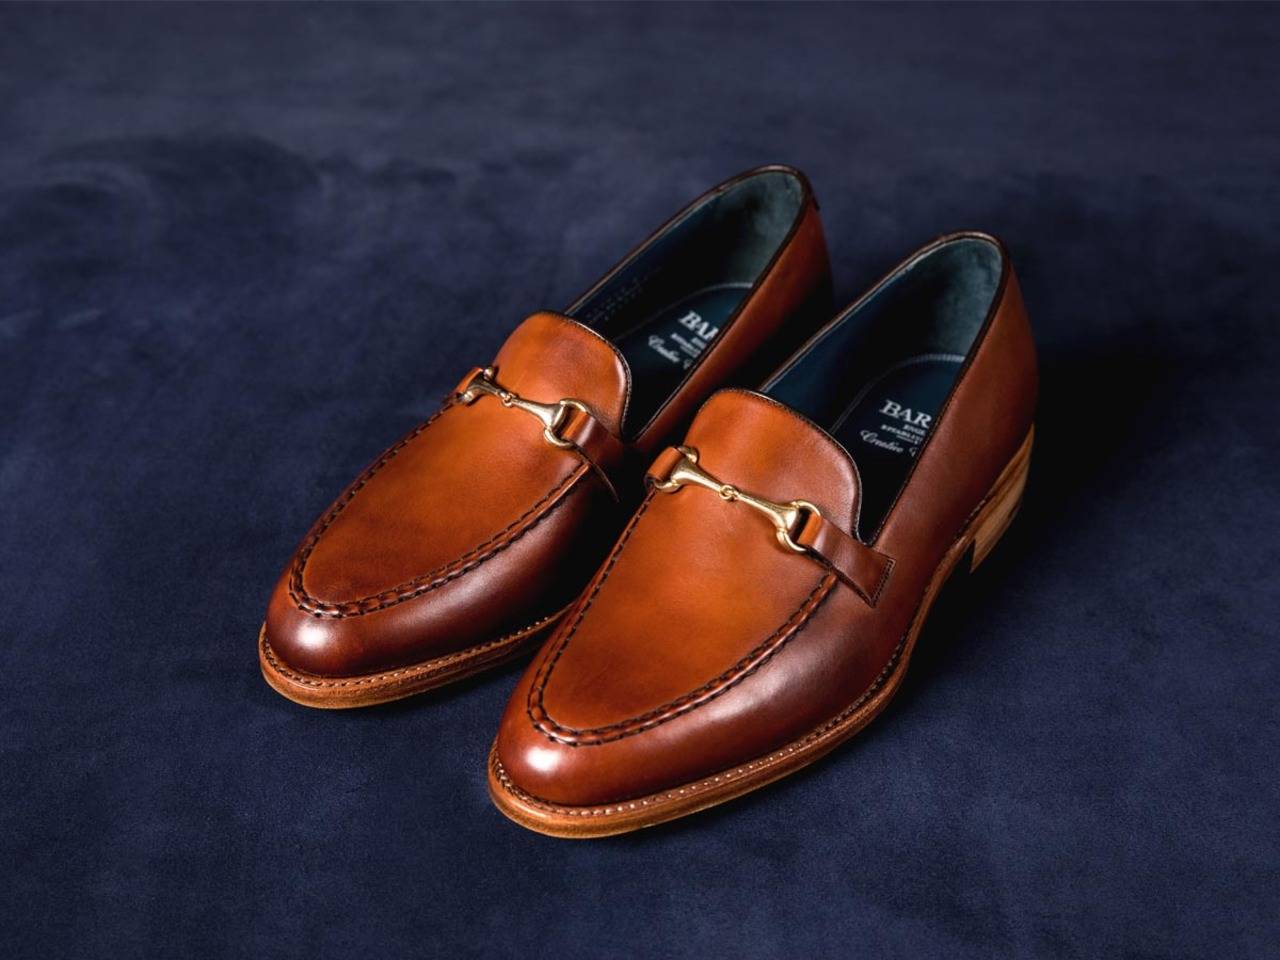 Nikke Effektivitet i gang Loafer shoes: Stylish and comfortable style that every man should own | -  Times of India